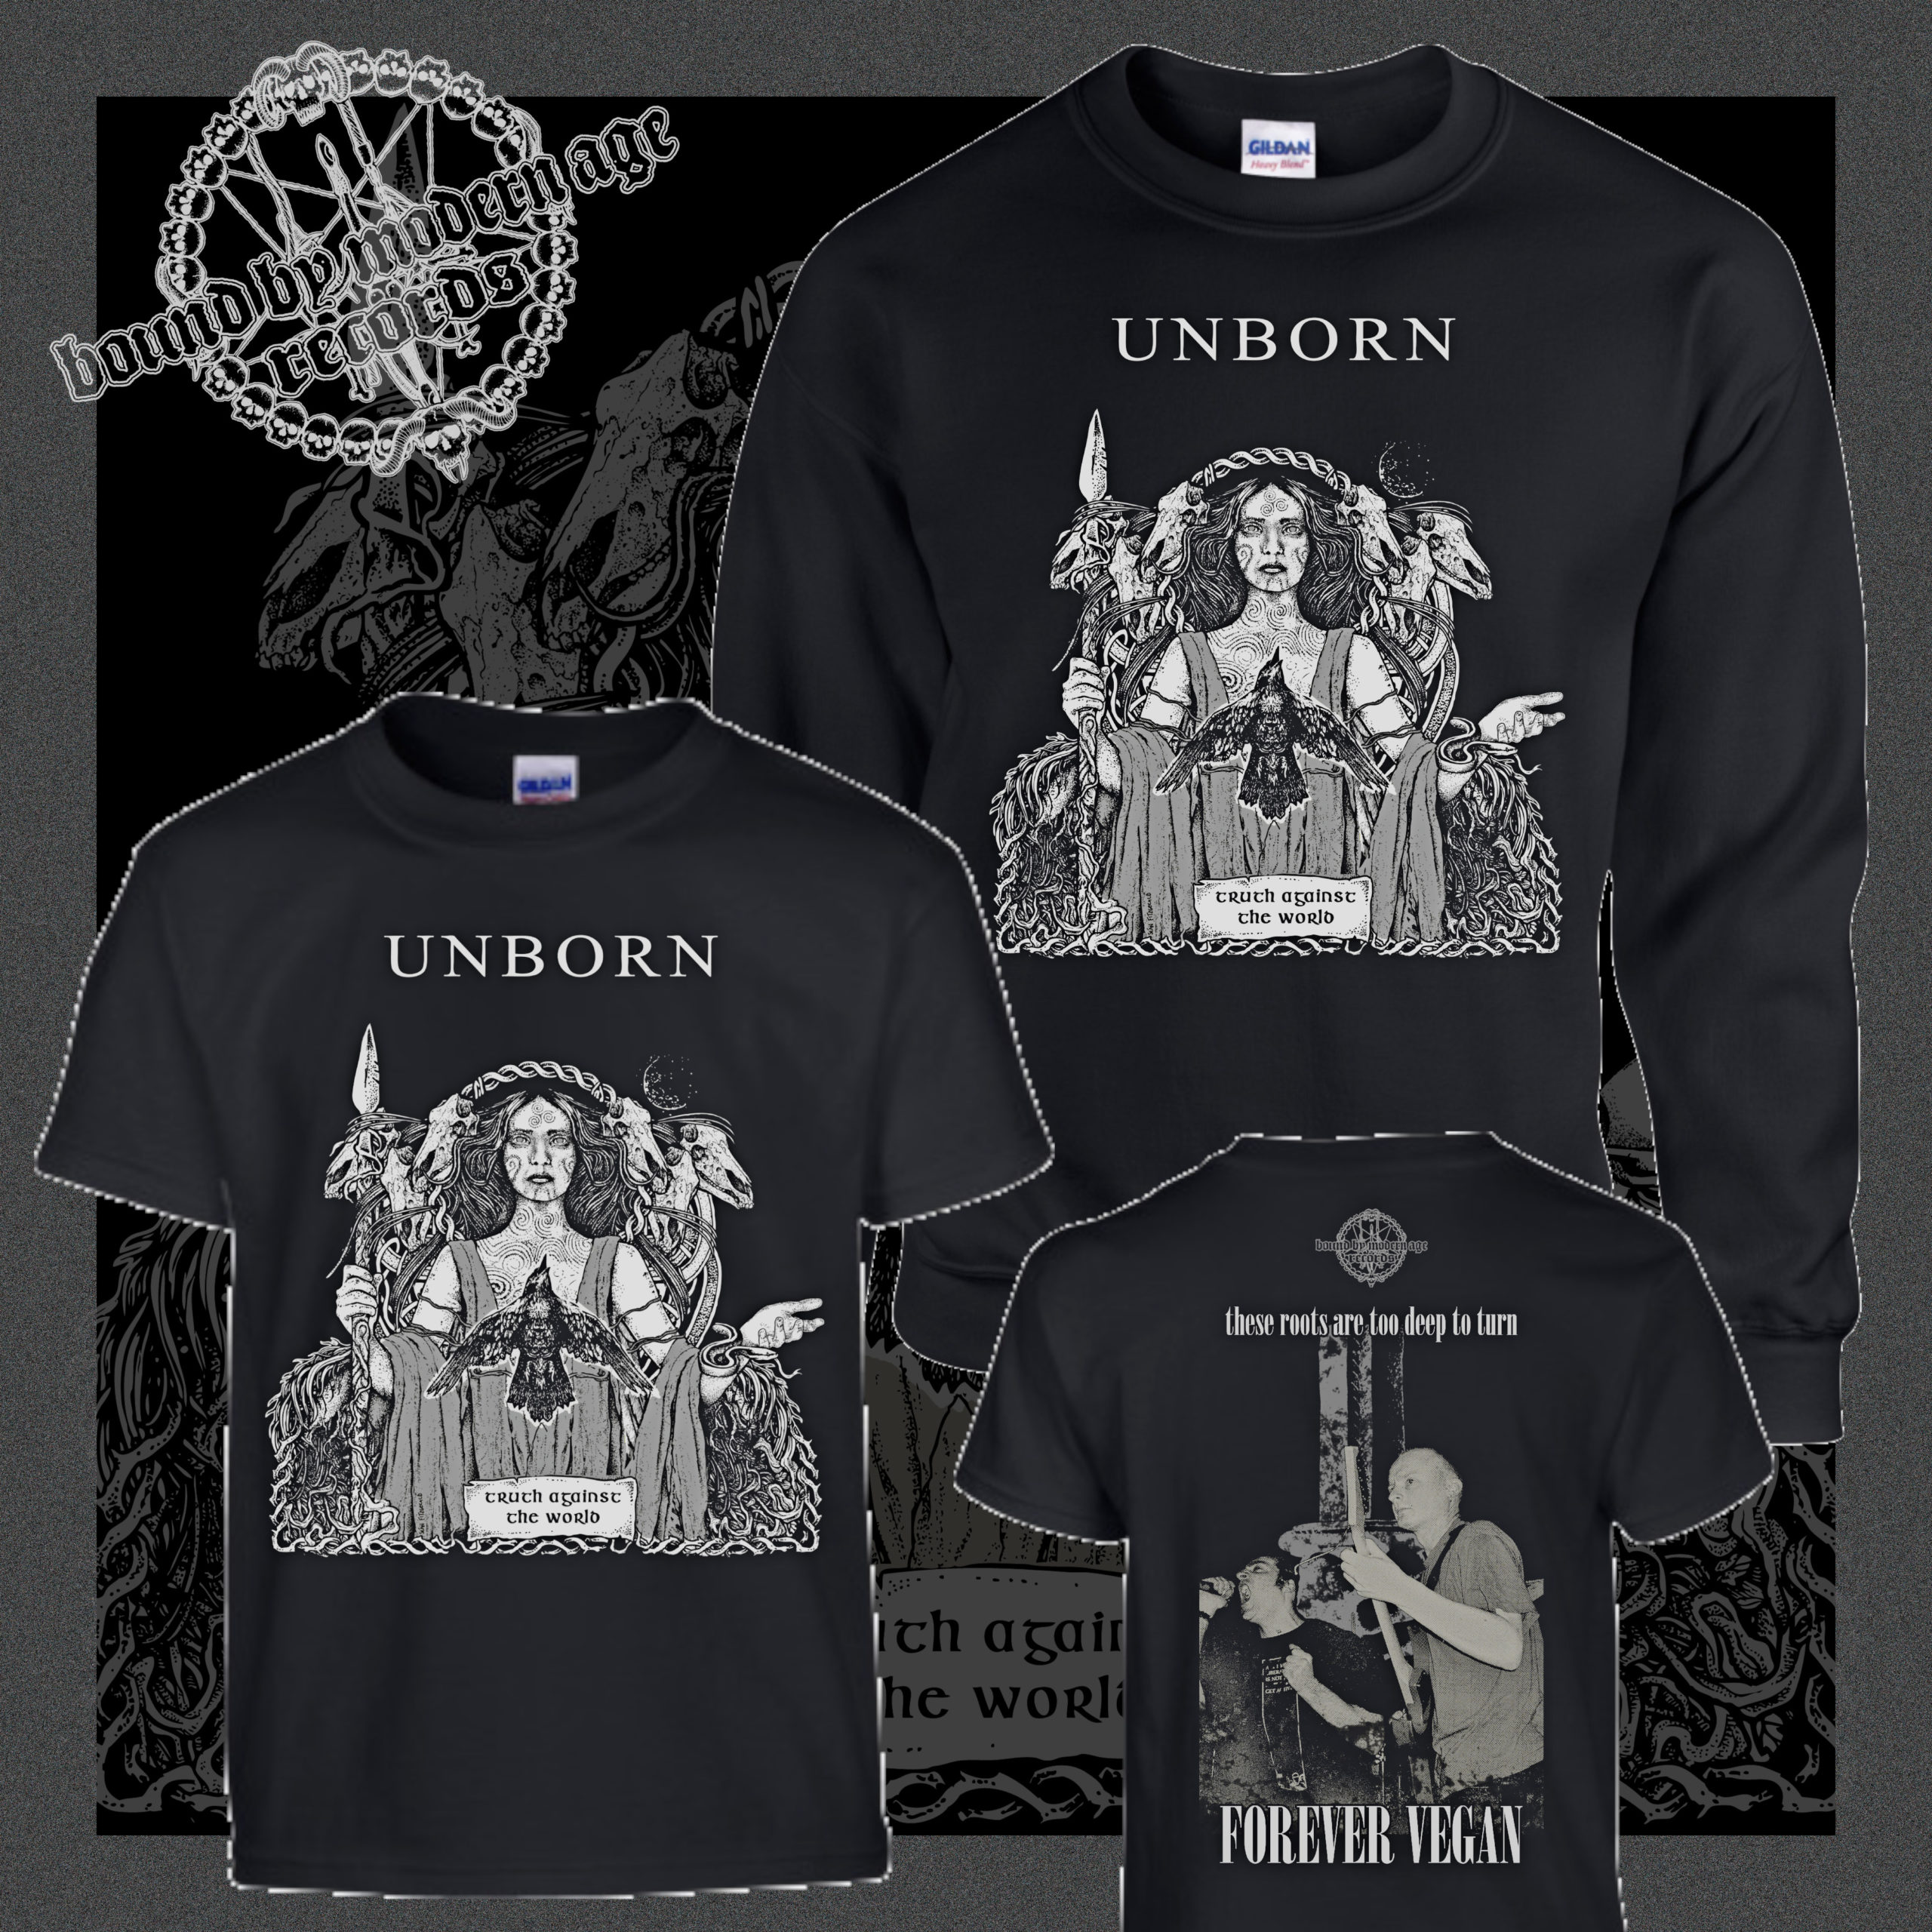 Unborn – Truth Against The World Shirt/Sweater | Bound By Modern